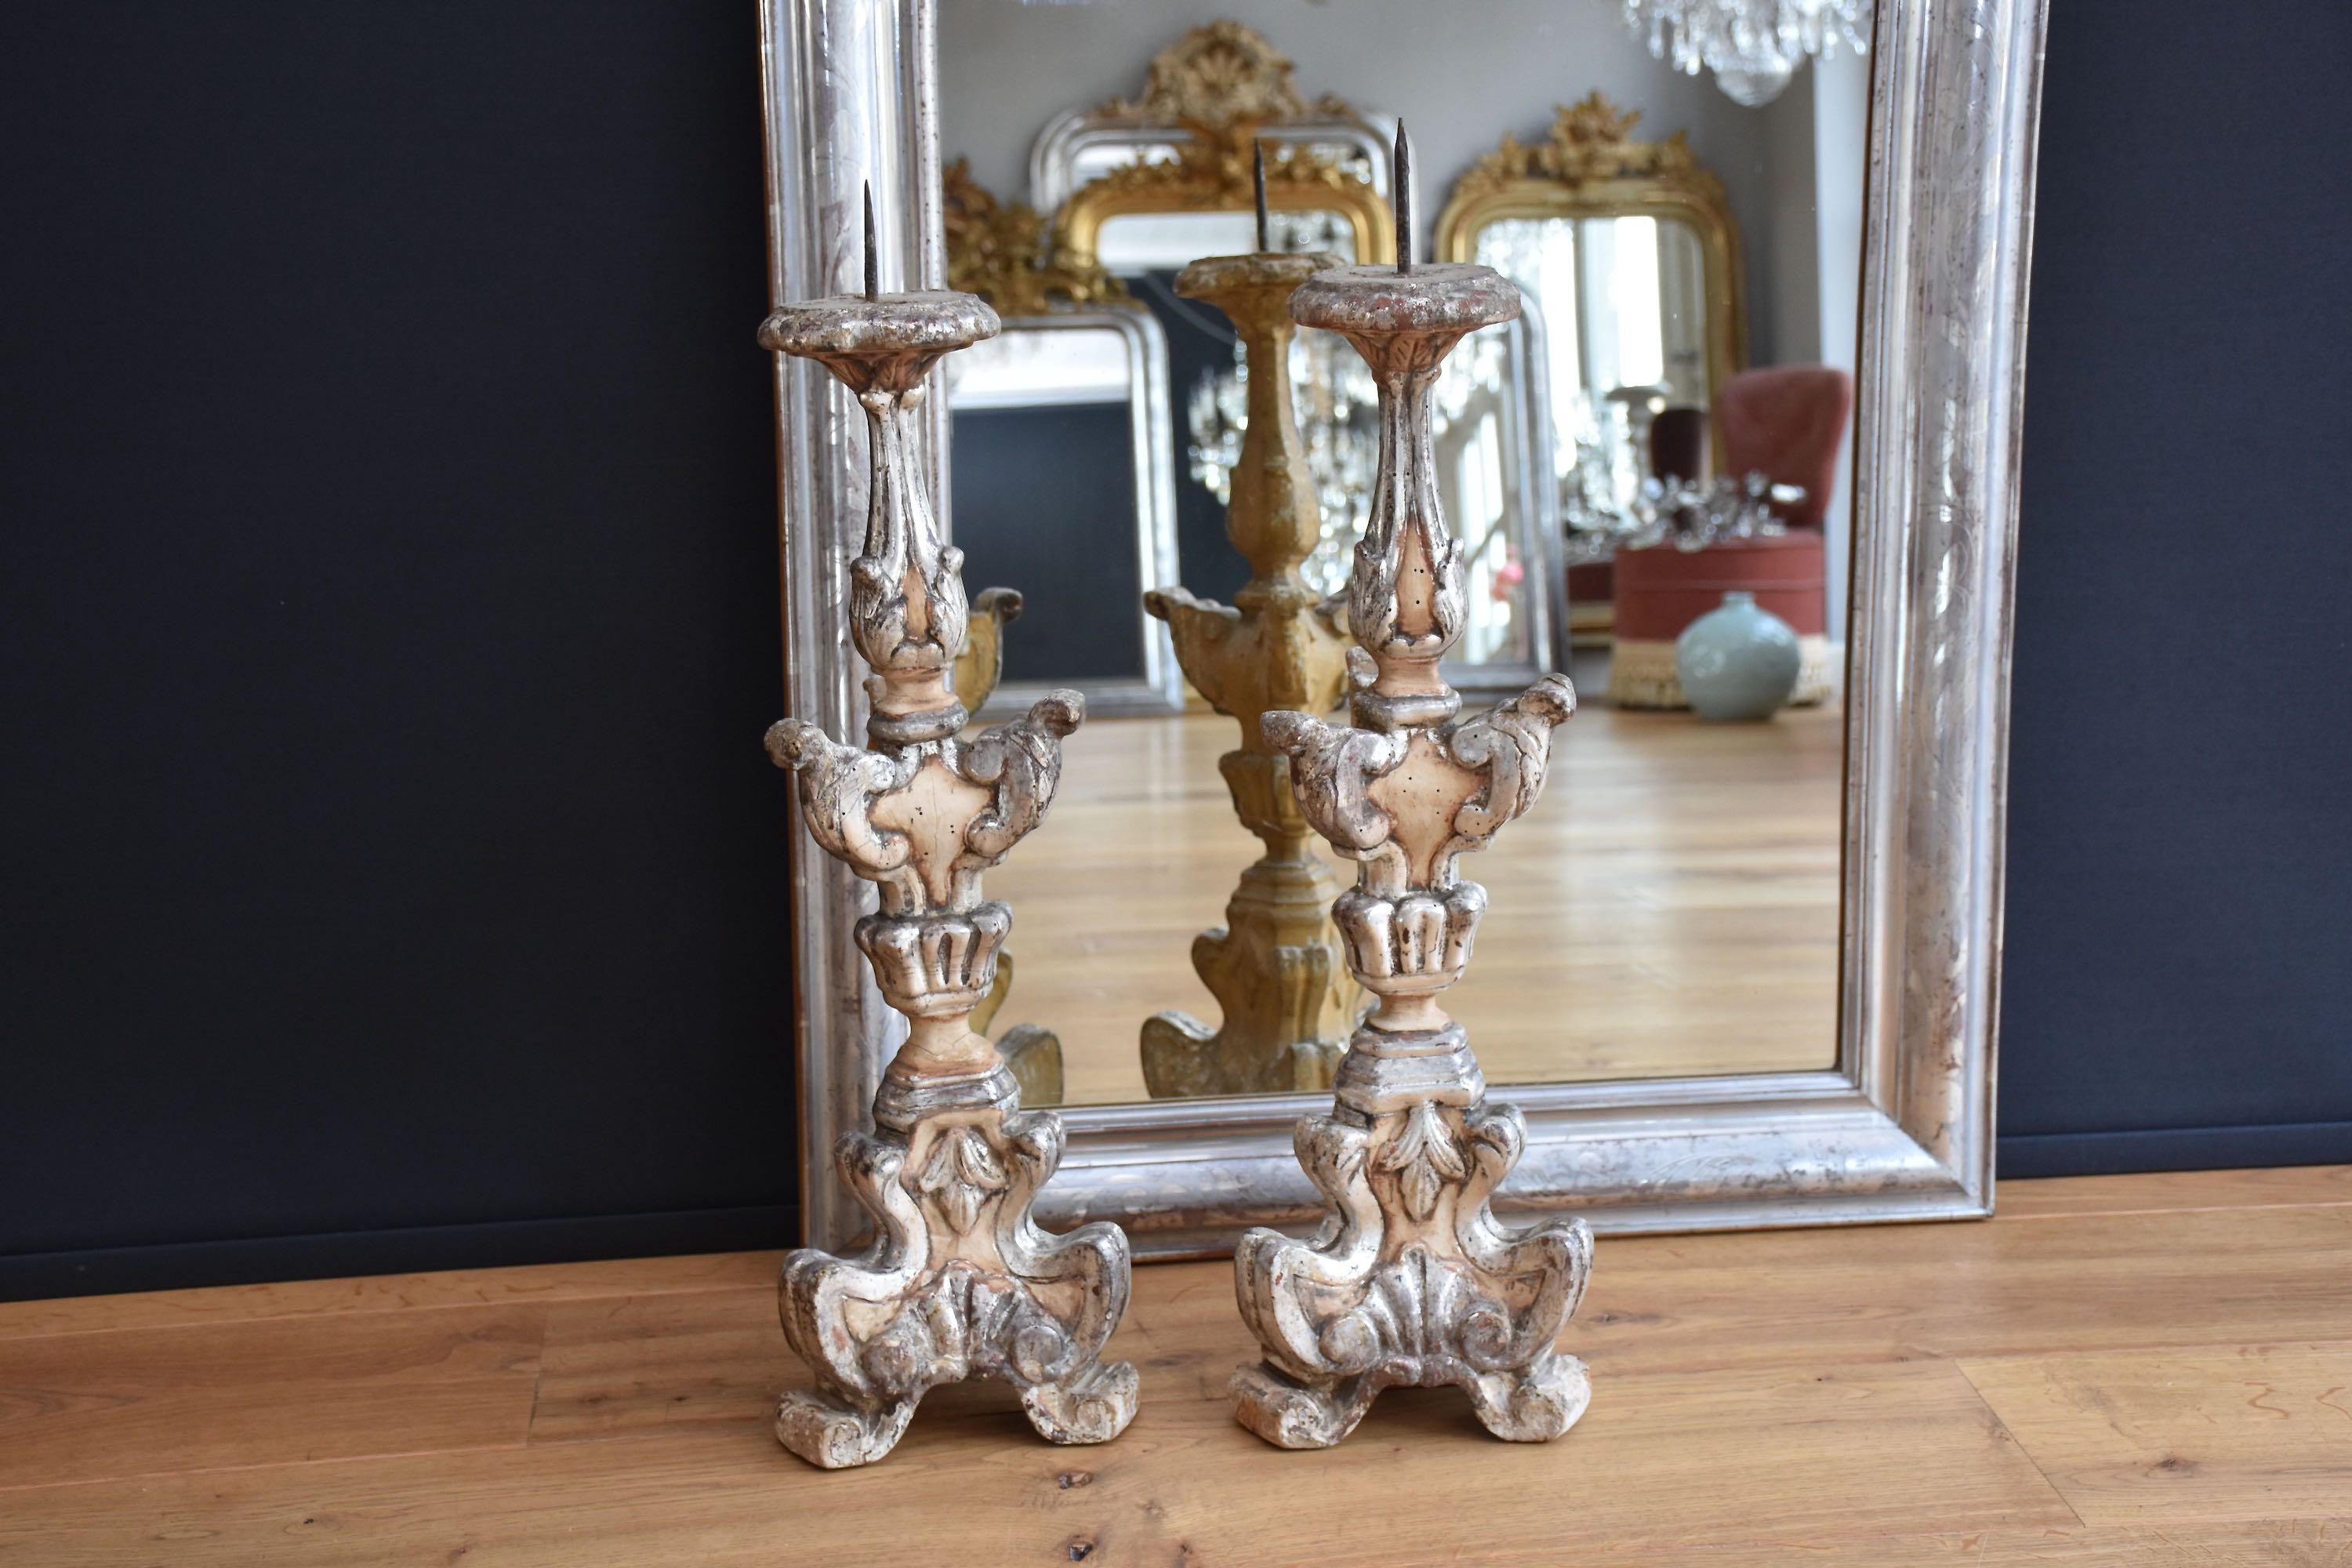 A beautiful pair of original carved and gilded wooden Italian torcheres/ pricket sticks.
The torcheres are in crème colour and have original silver leaf gilding.
Silver-leaf finish is only in front of the torcheres.
The torcheres date from the 19th